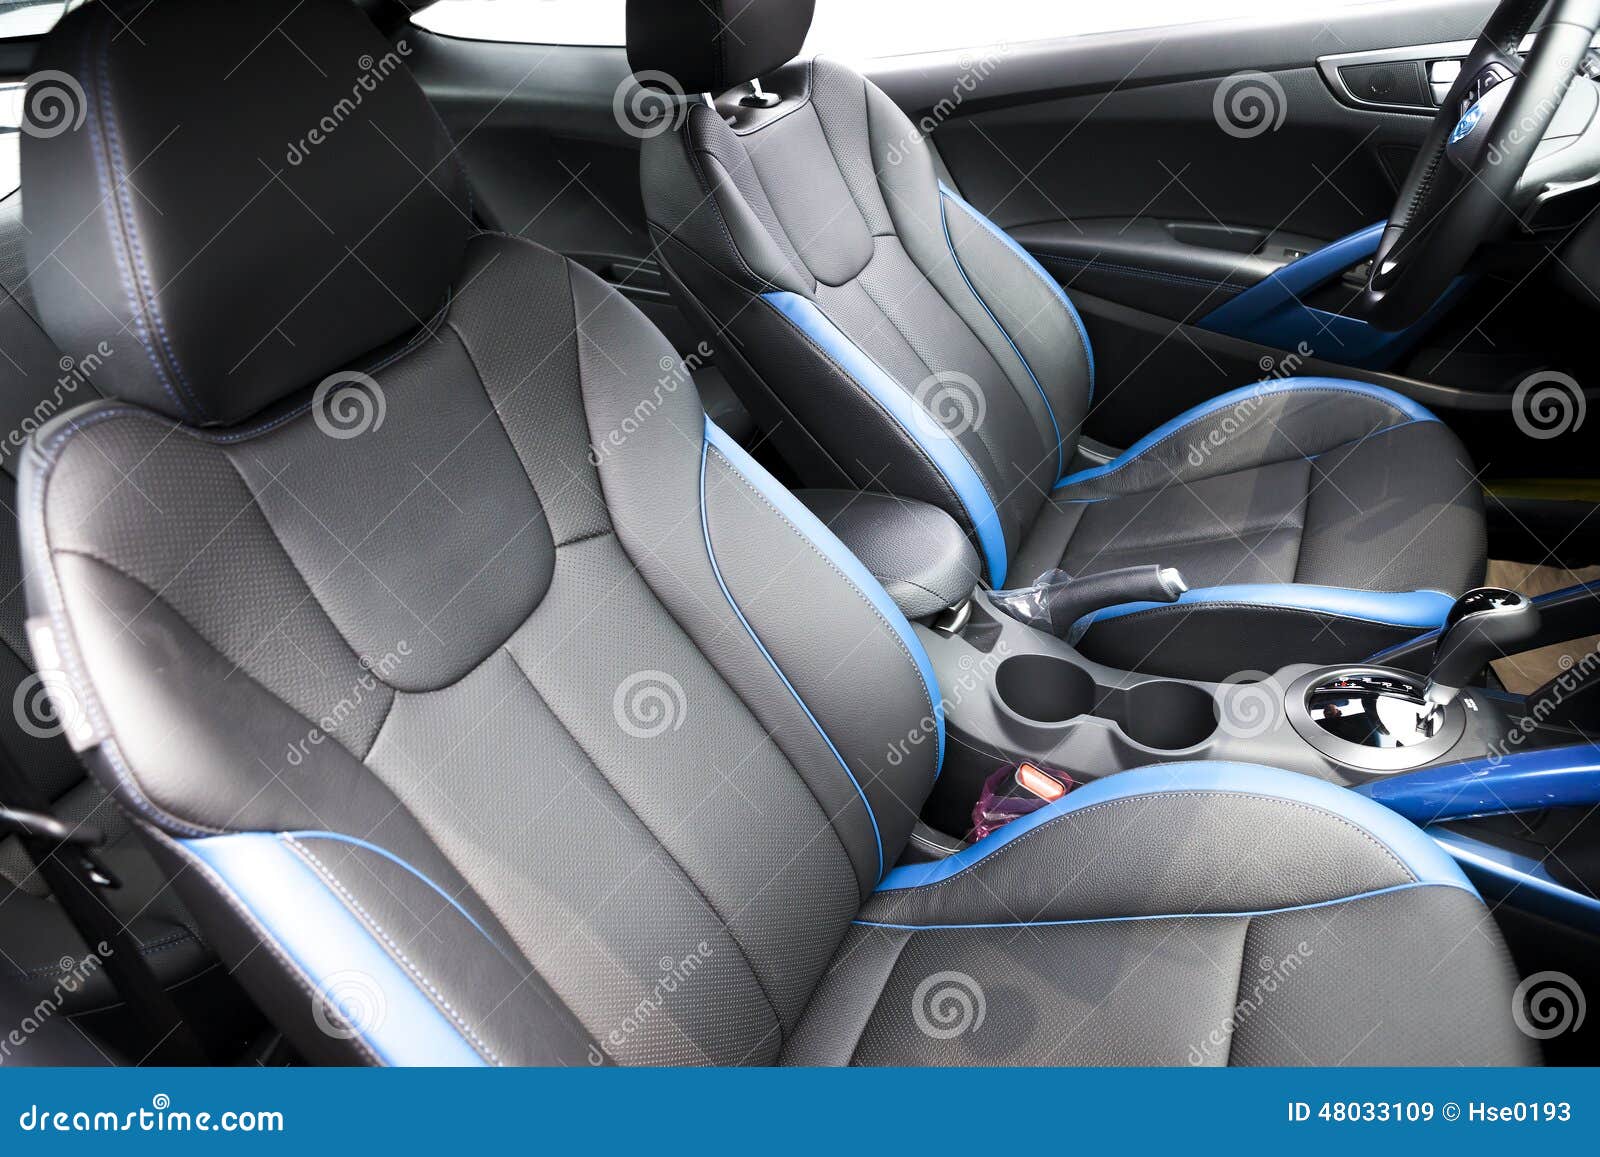 Front View Car Interior Stock Photos - 31,549 Images